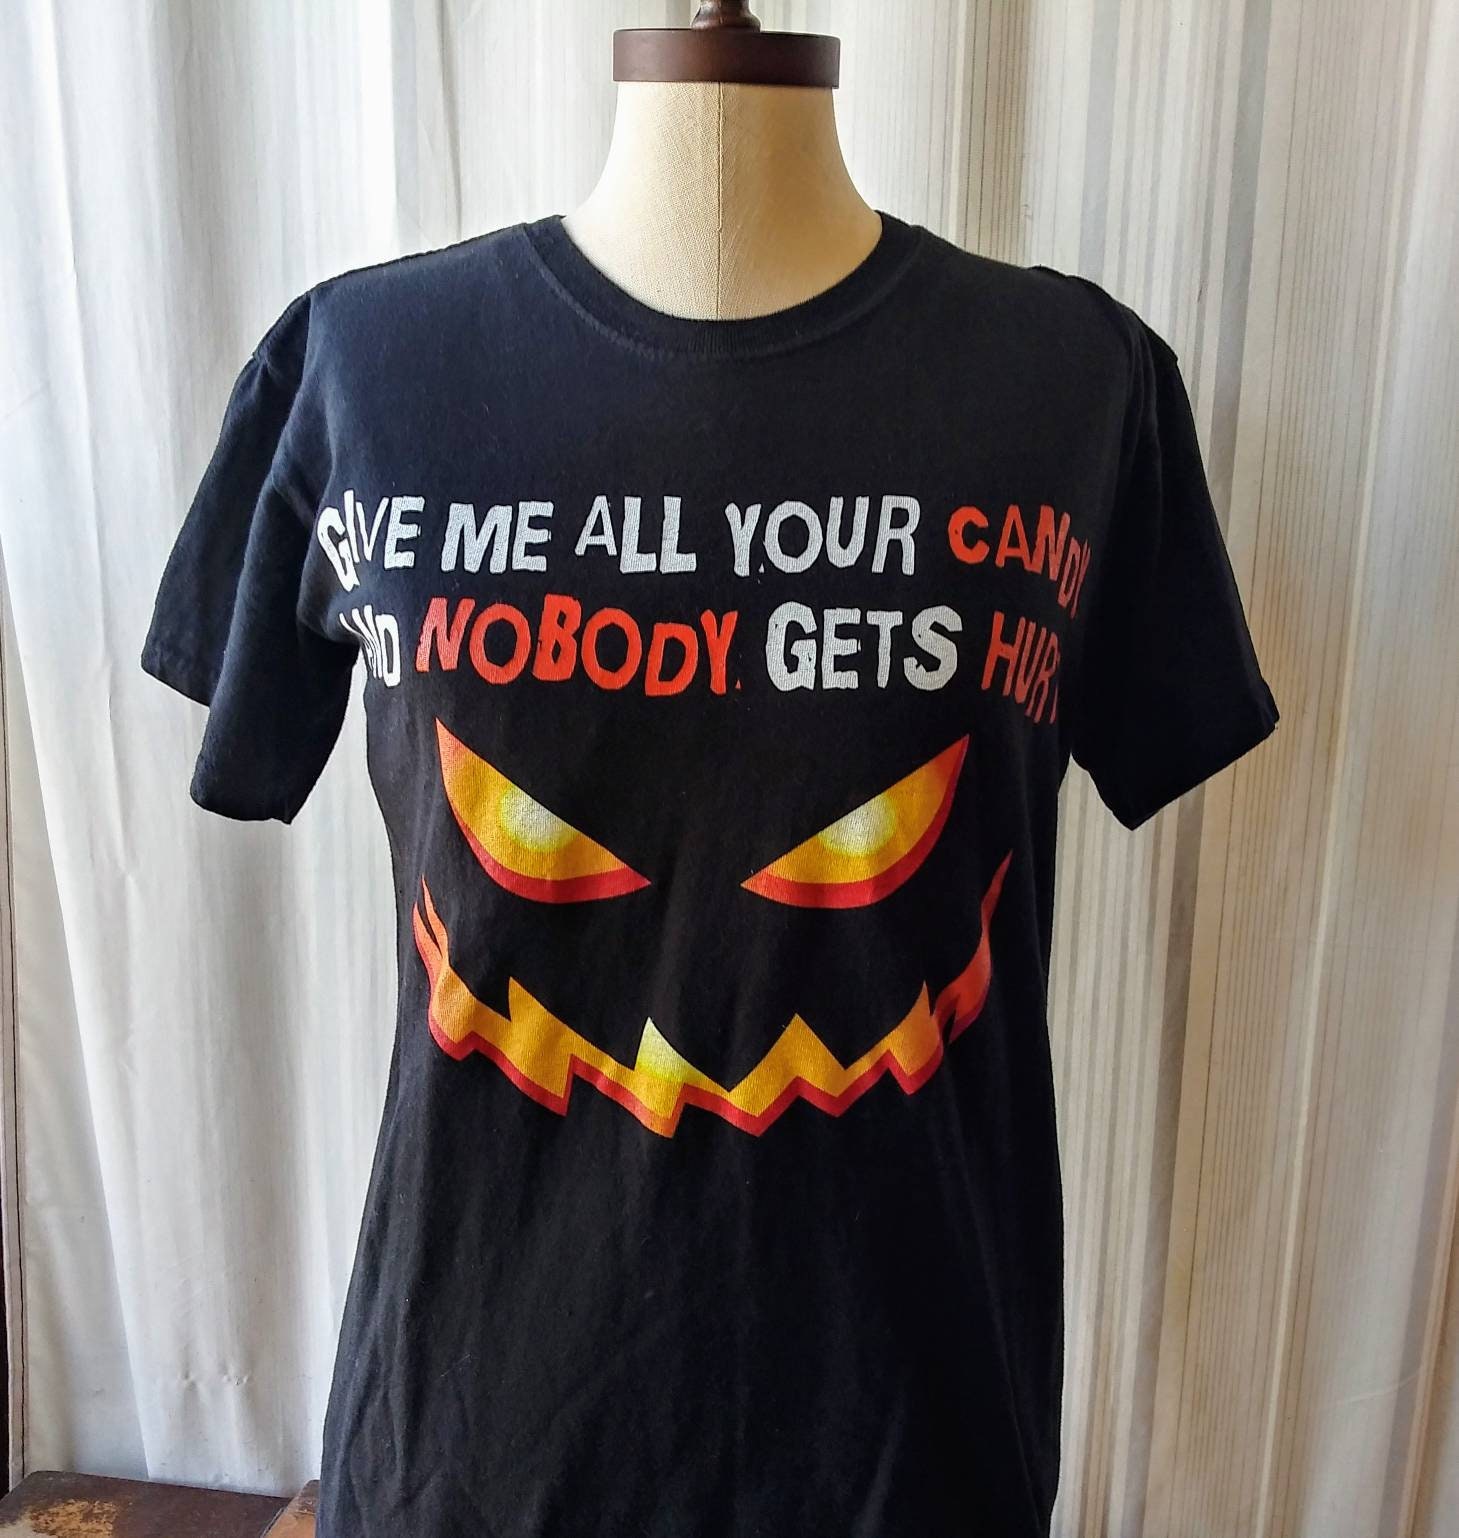 Discover Vintage Halloween T Shirt Evil Pumpkin Give Me All Your Candy Size Small Cotton 90's Fashion T Shirt Candy Corn Grin